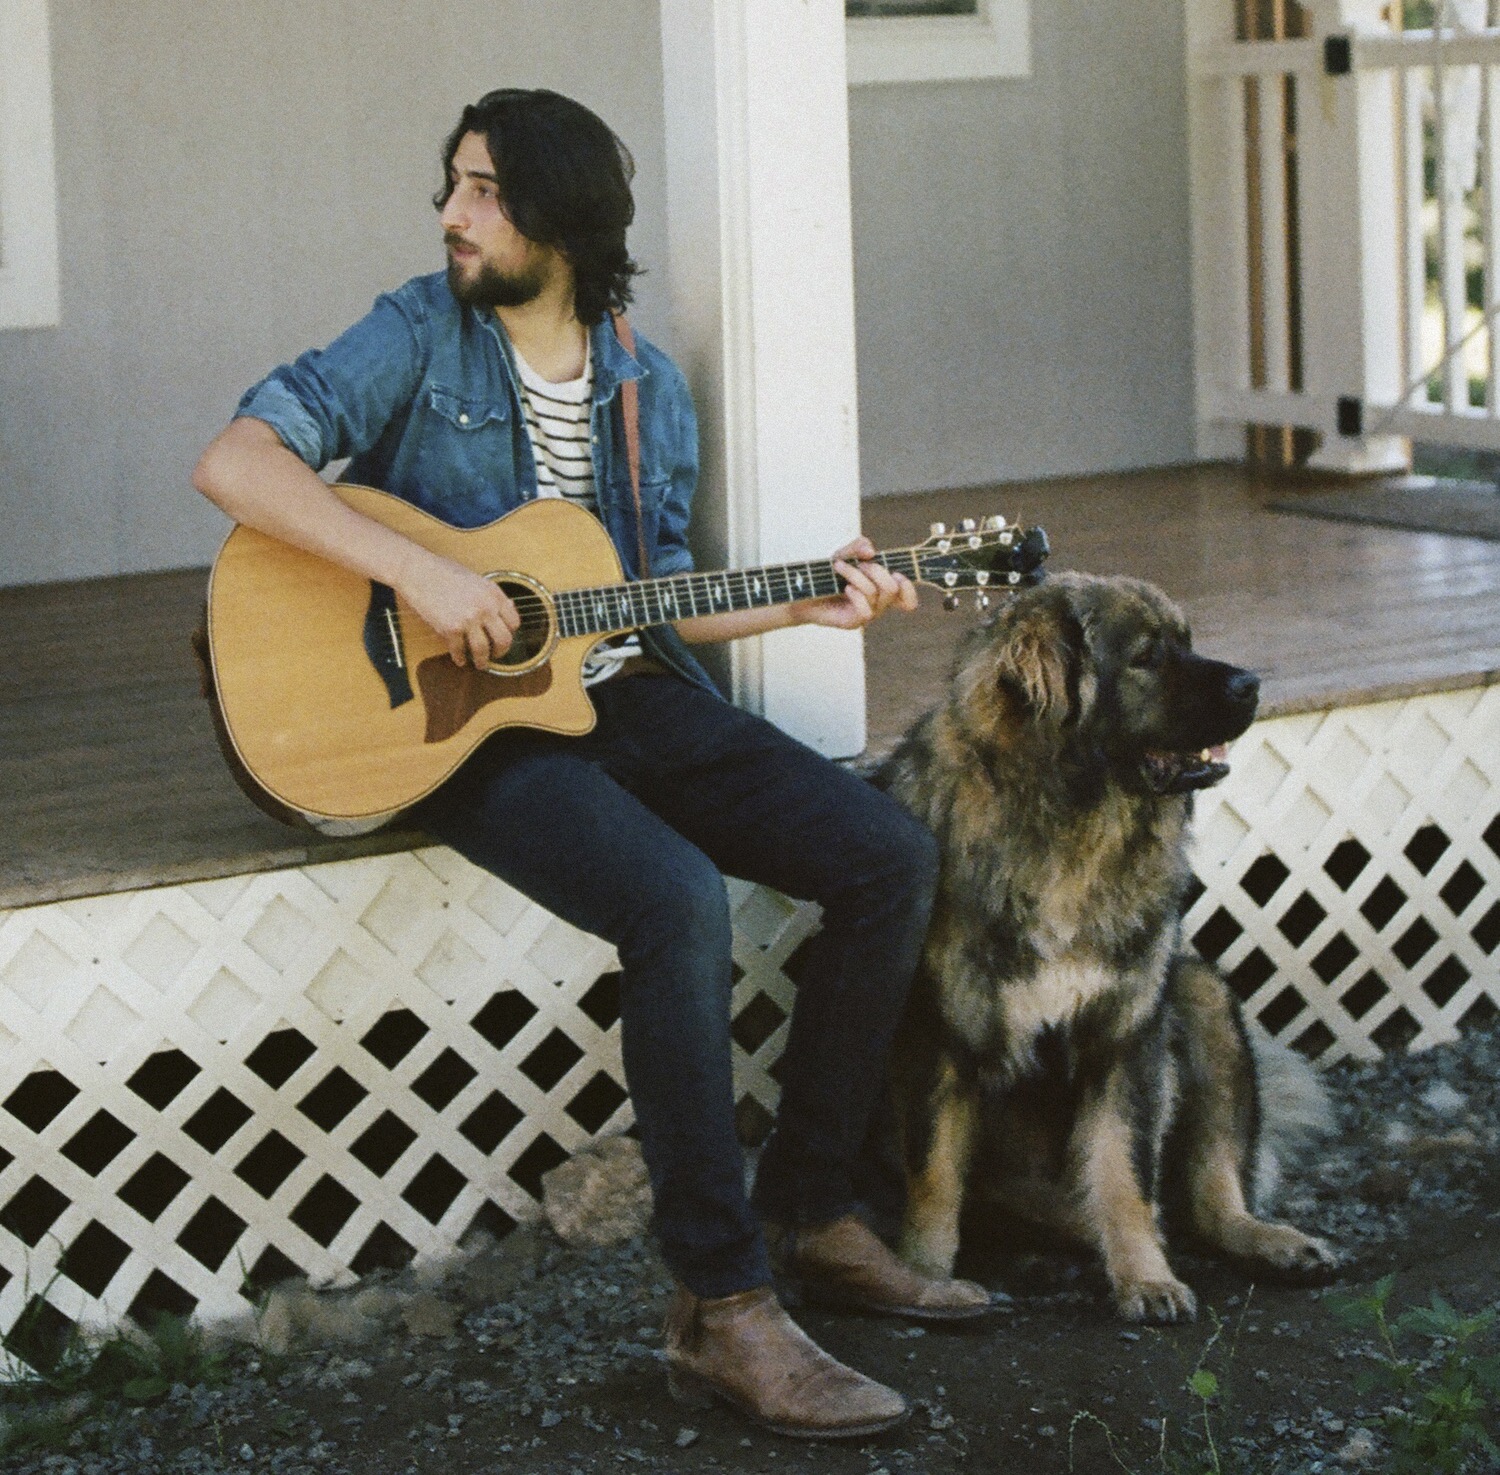 Noah Kahan sits outside on the porch with his dog while holding his guitar.